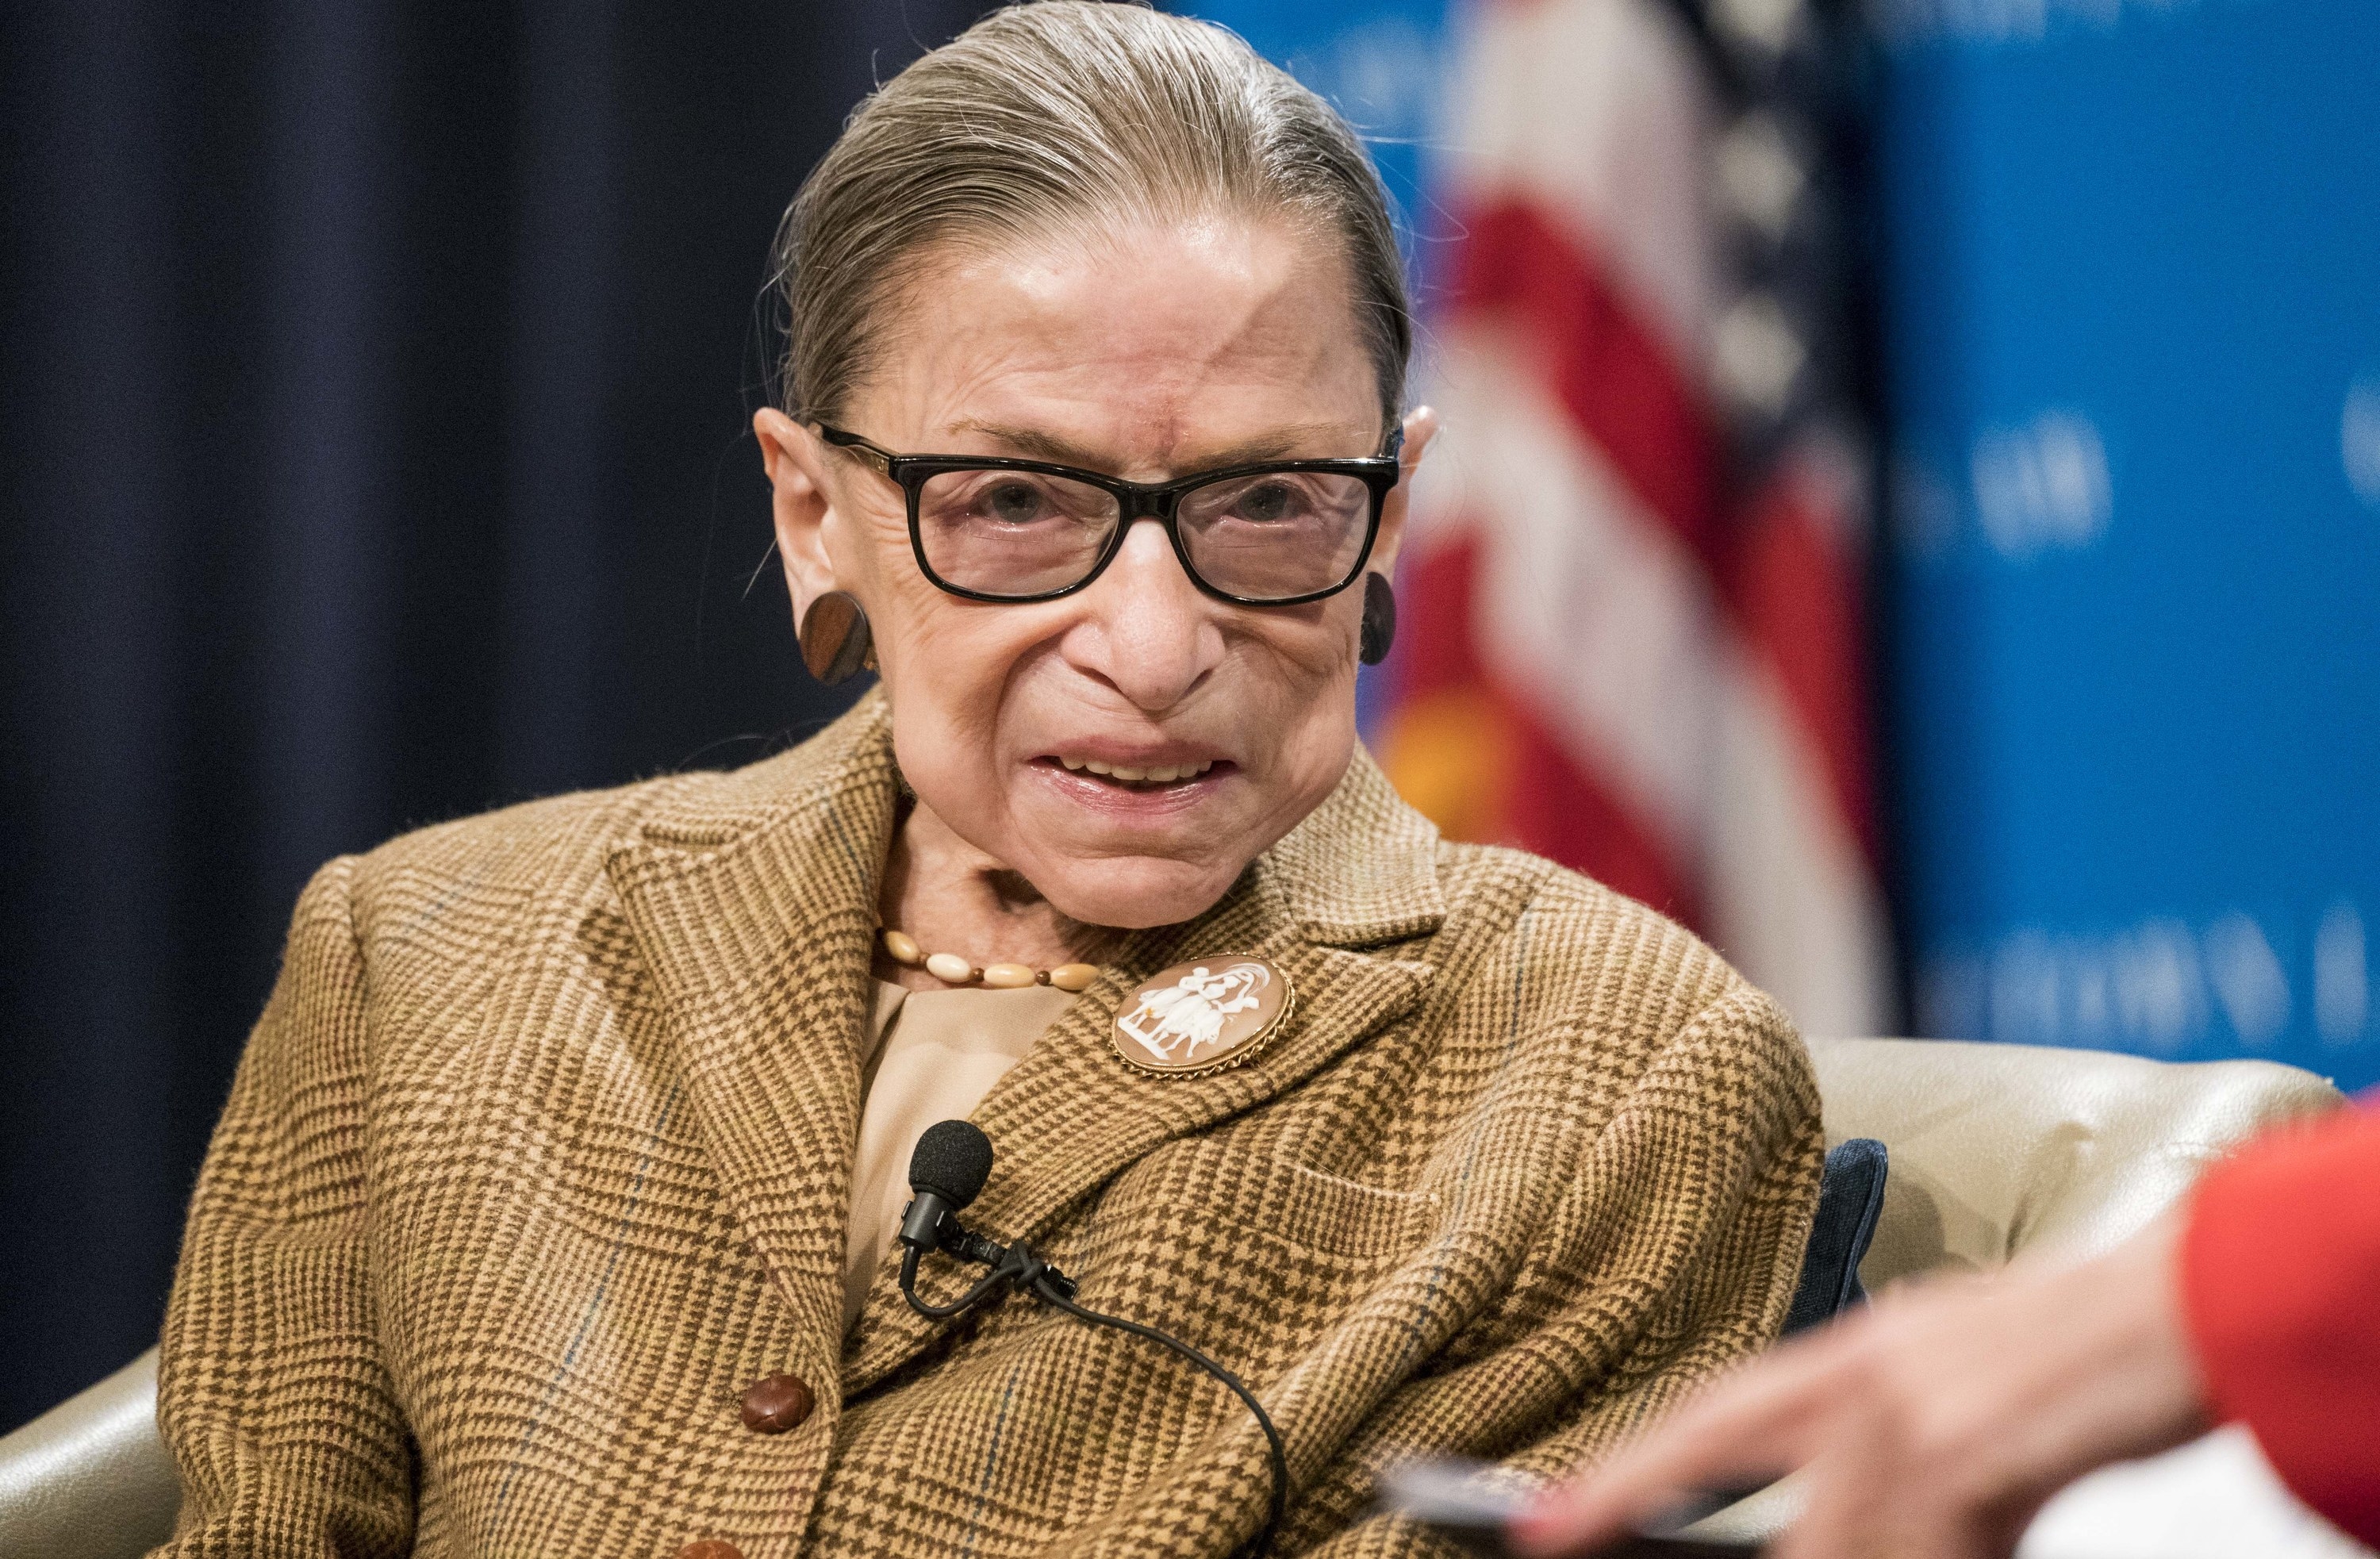 Ruth Bader Ginsberg wearing a tweed suit and smiling,